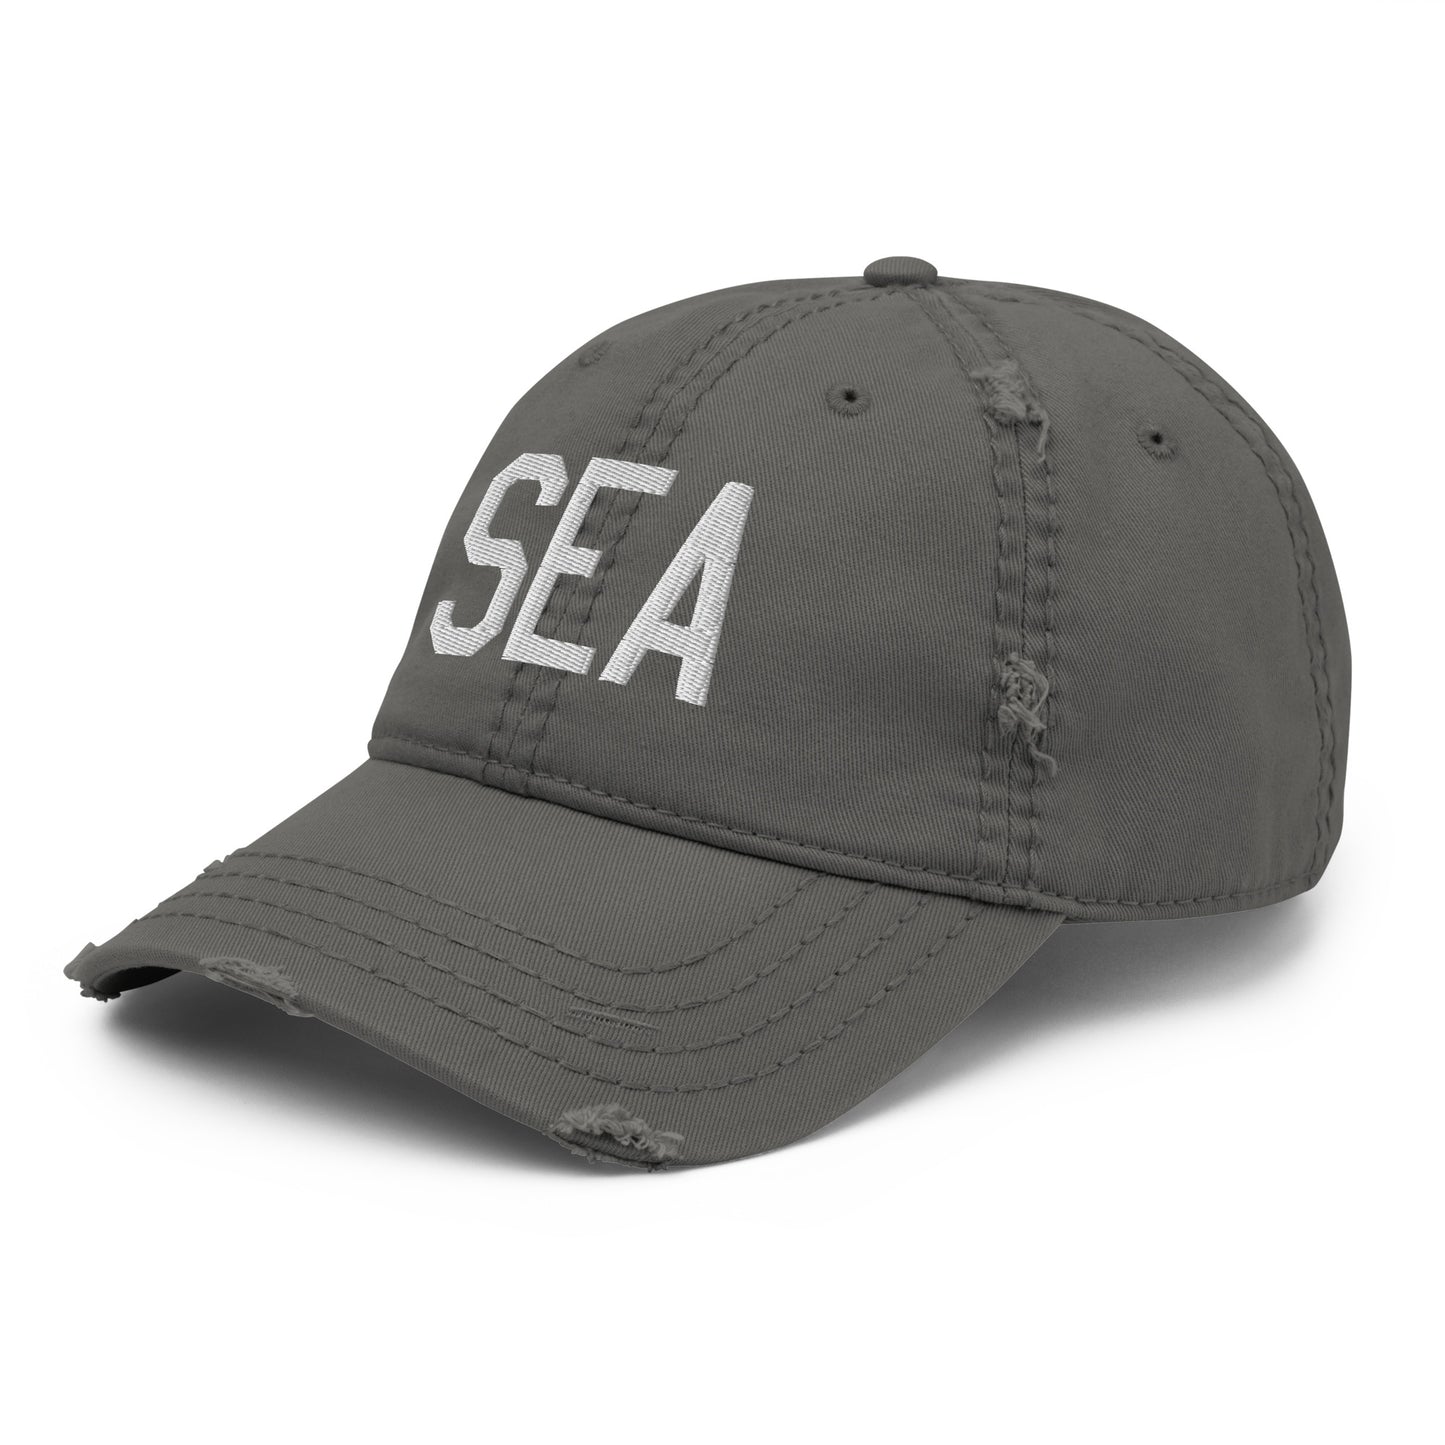 Airport Code Distressed Hat - White • SEA Seattle • YHM Designs - Image 16